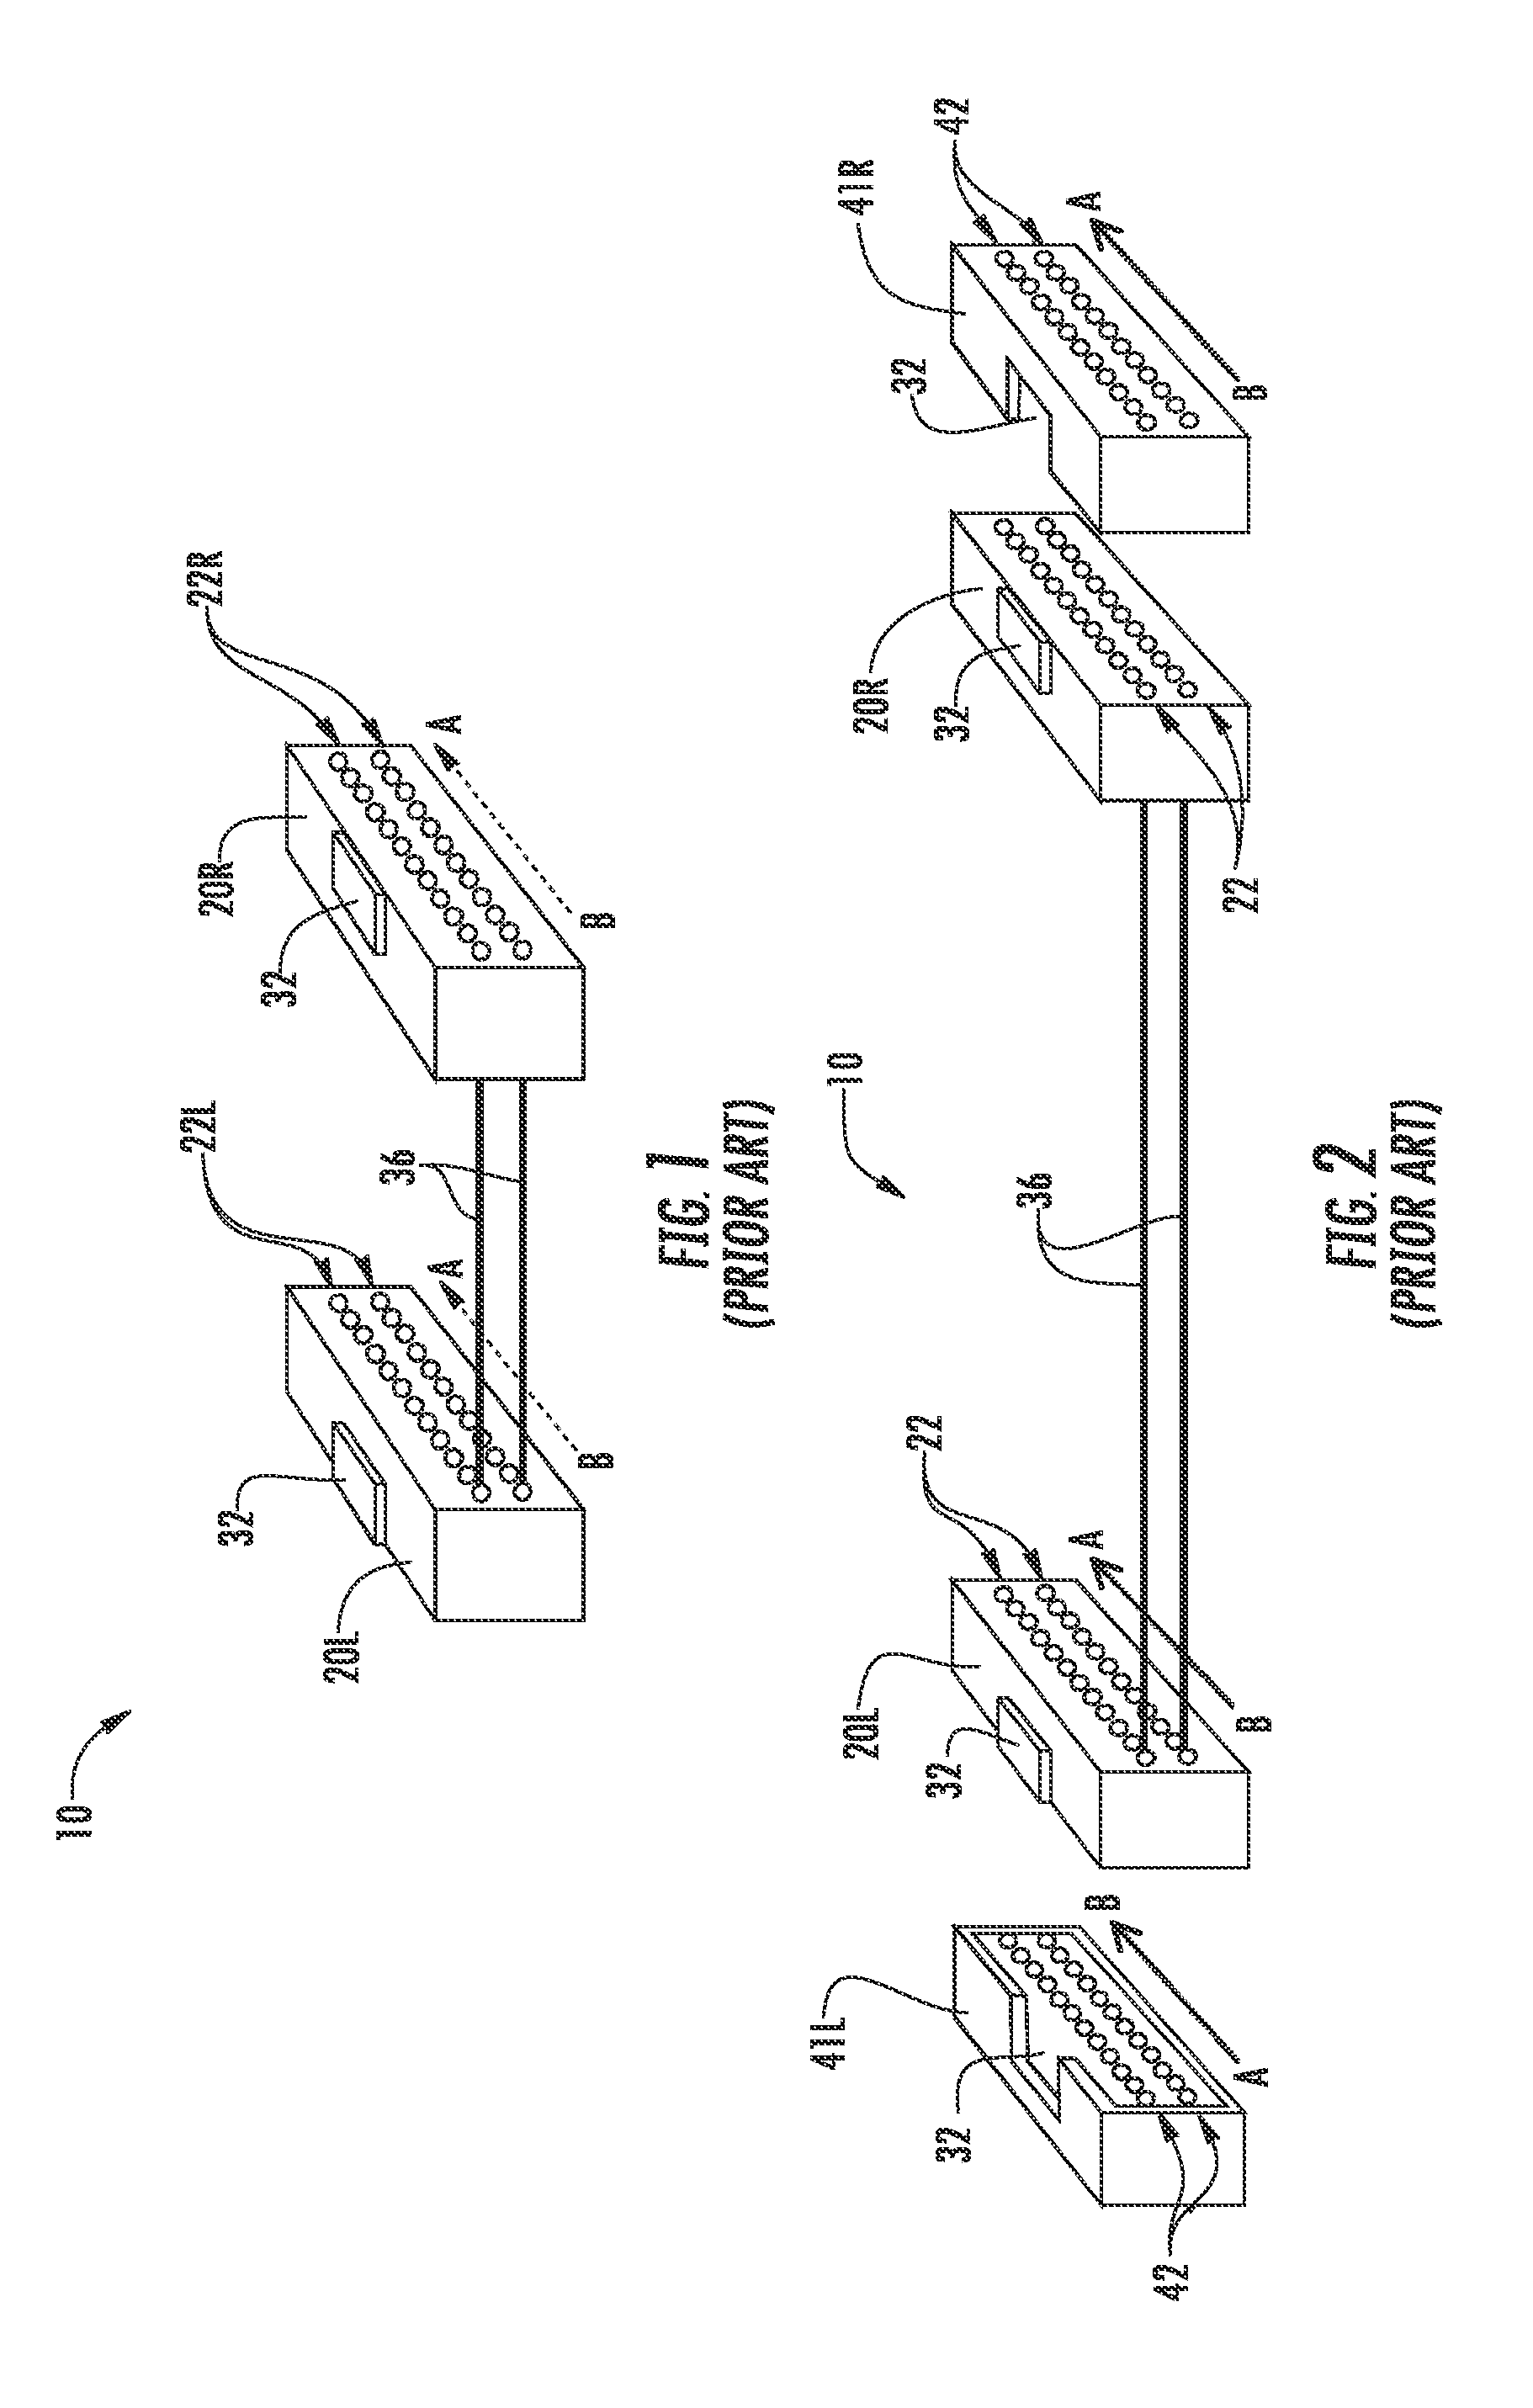 Optical interconnection methods for high-speed data-rate optical transport systems